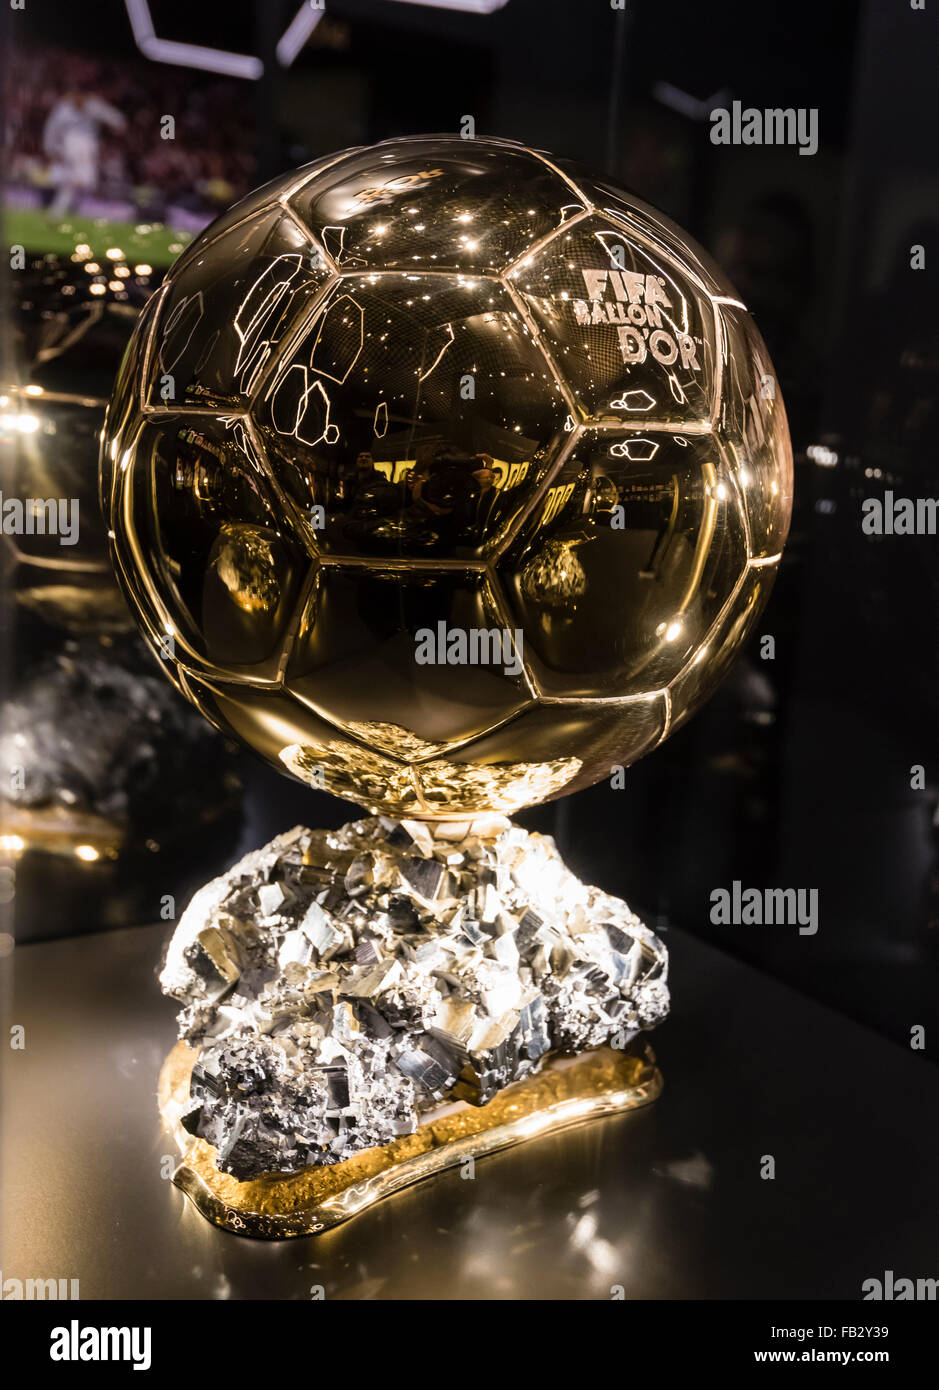 The FIFA Ballon d'Or trophy is exhibited at the future FIFA museum at Zurich, a few days before the 2015 award ceremony. Stock Photo